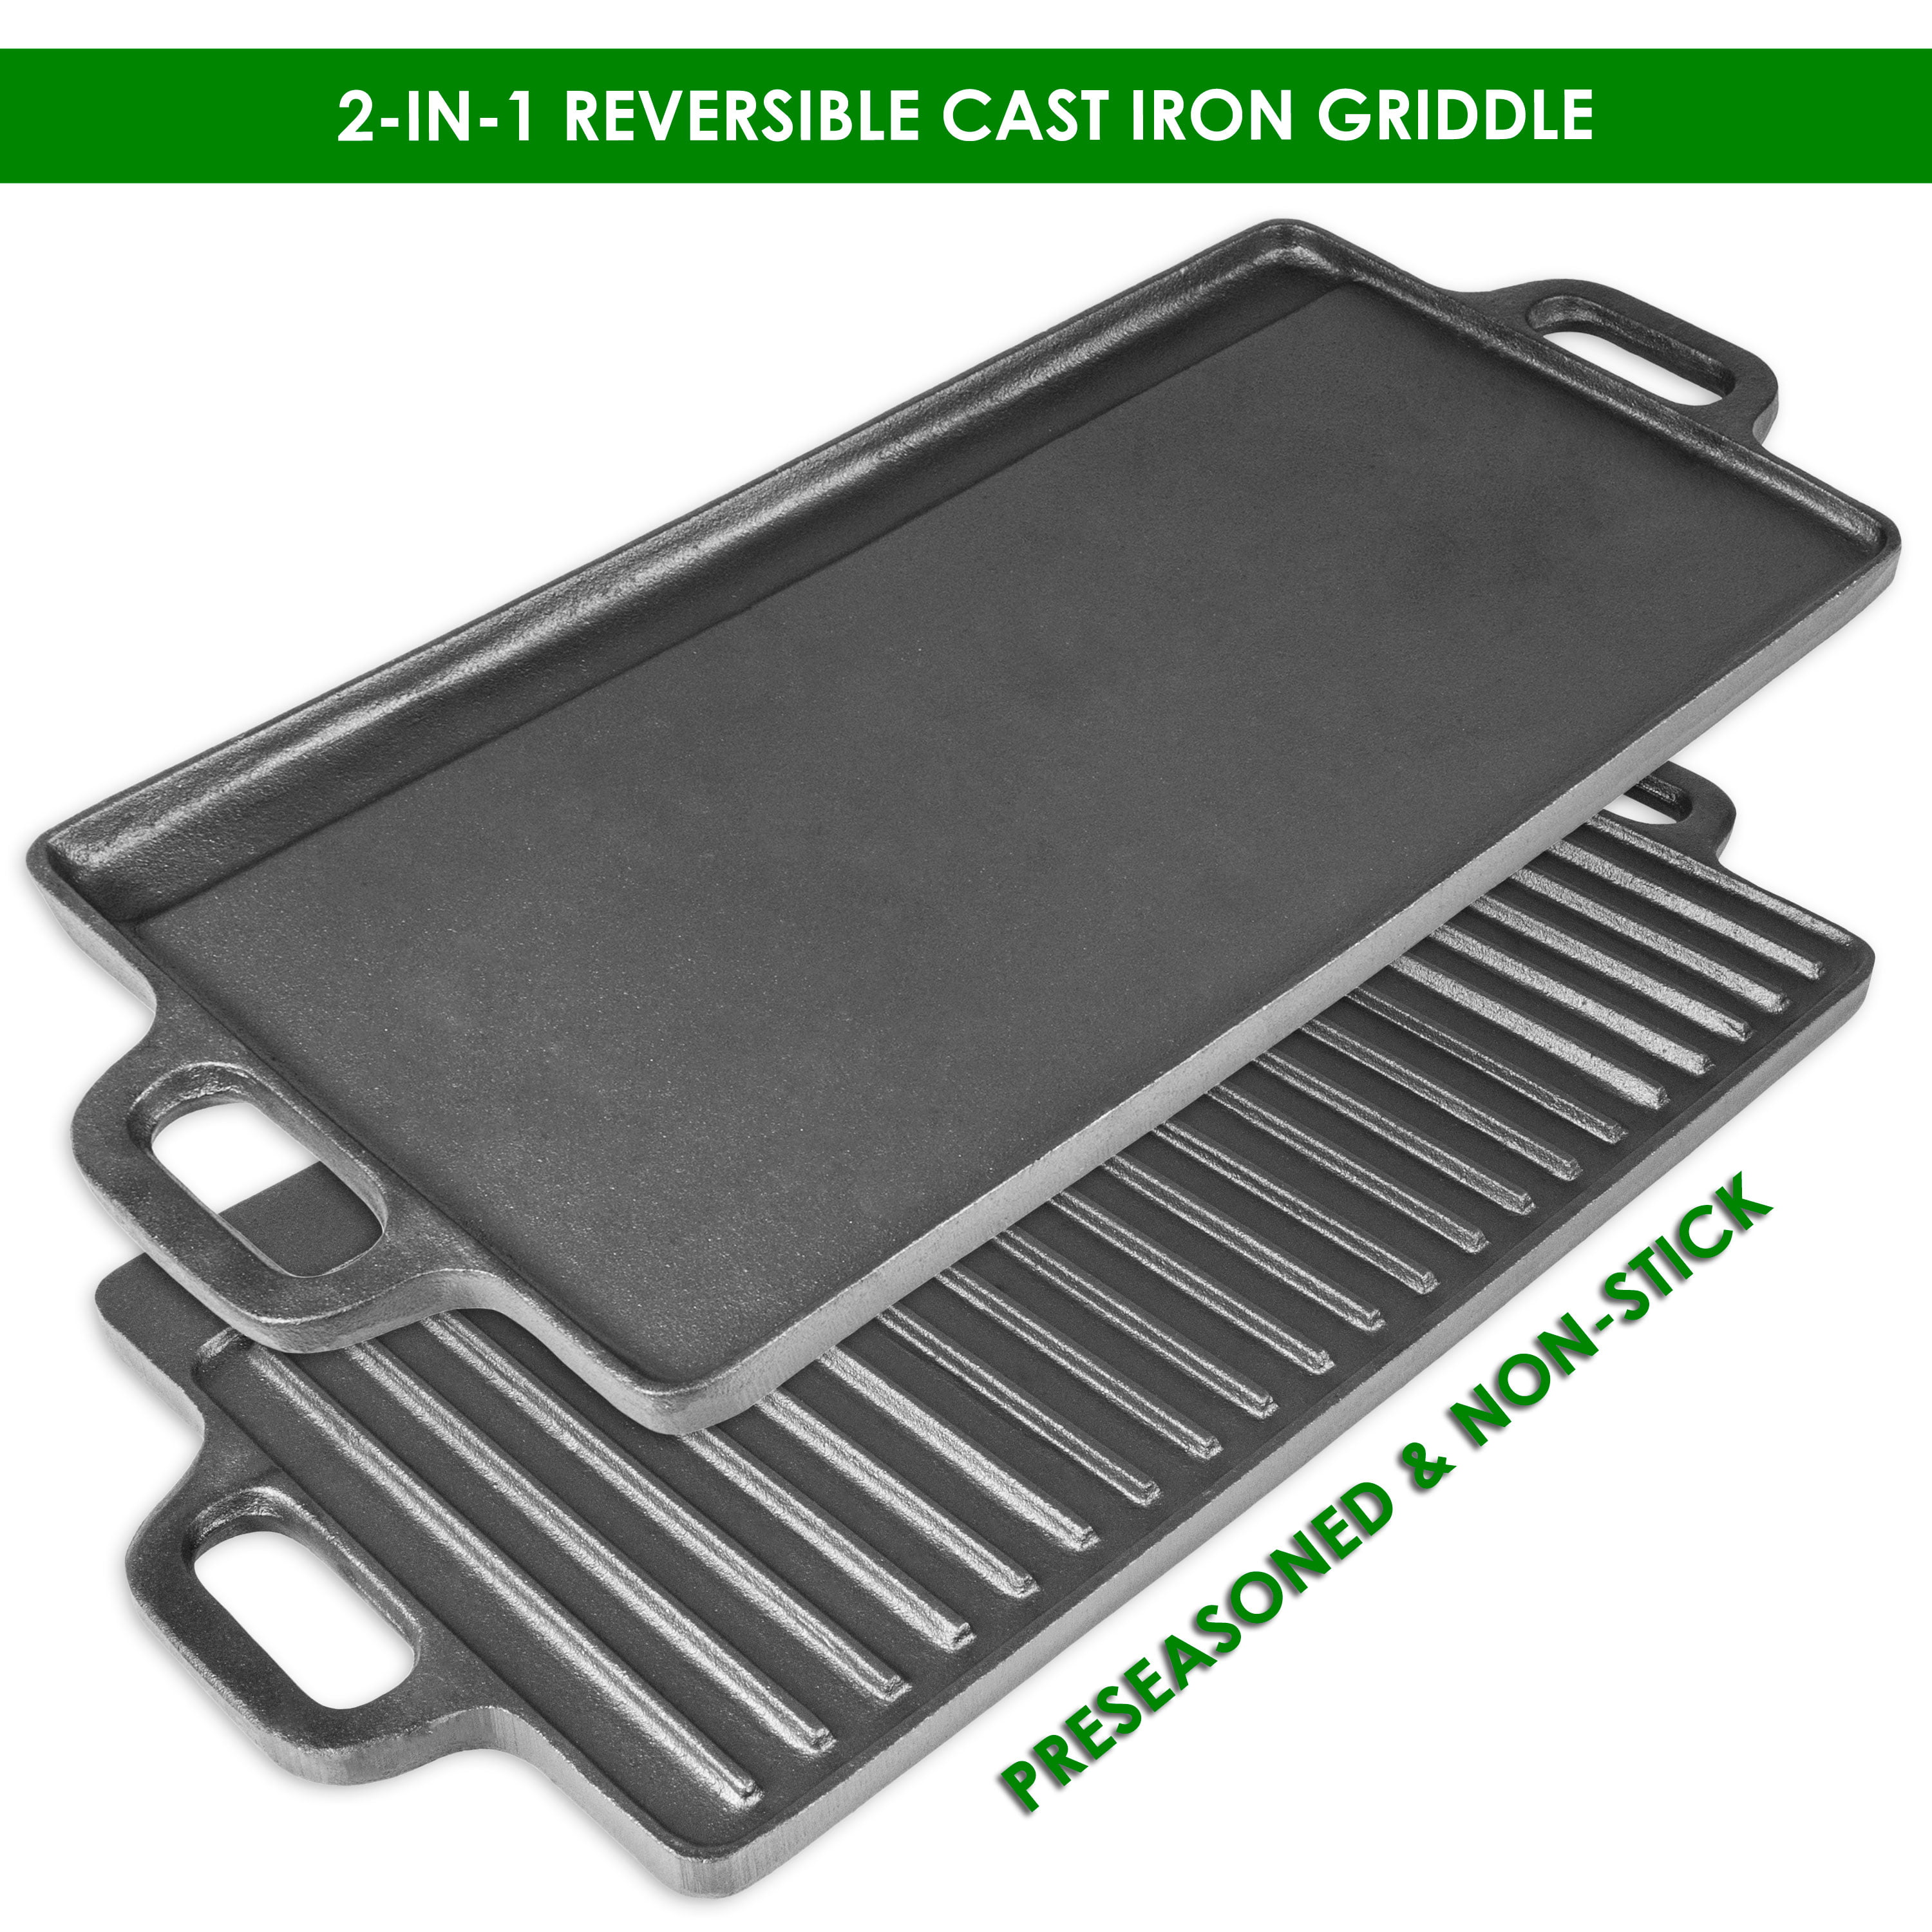 LARGE Reversible Cast Iron Grill Griddle Pan Hamburger Steak Stove Top Fry BBQ